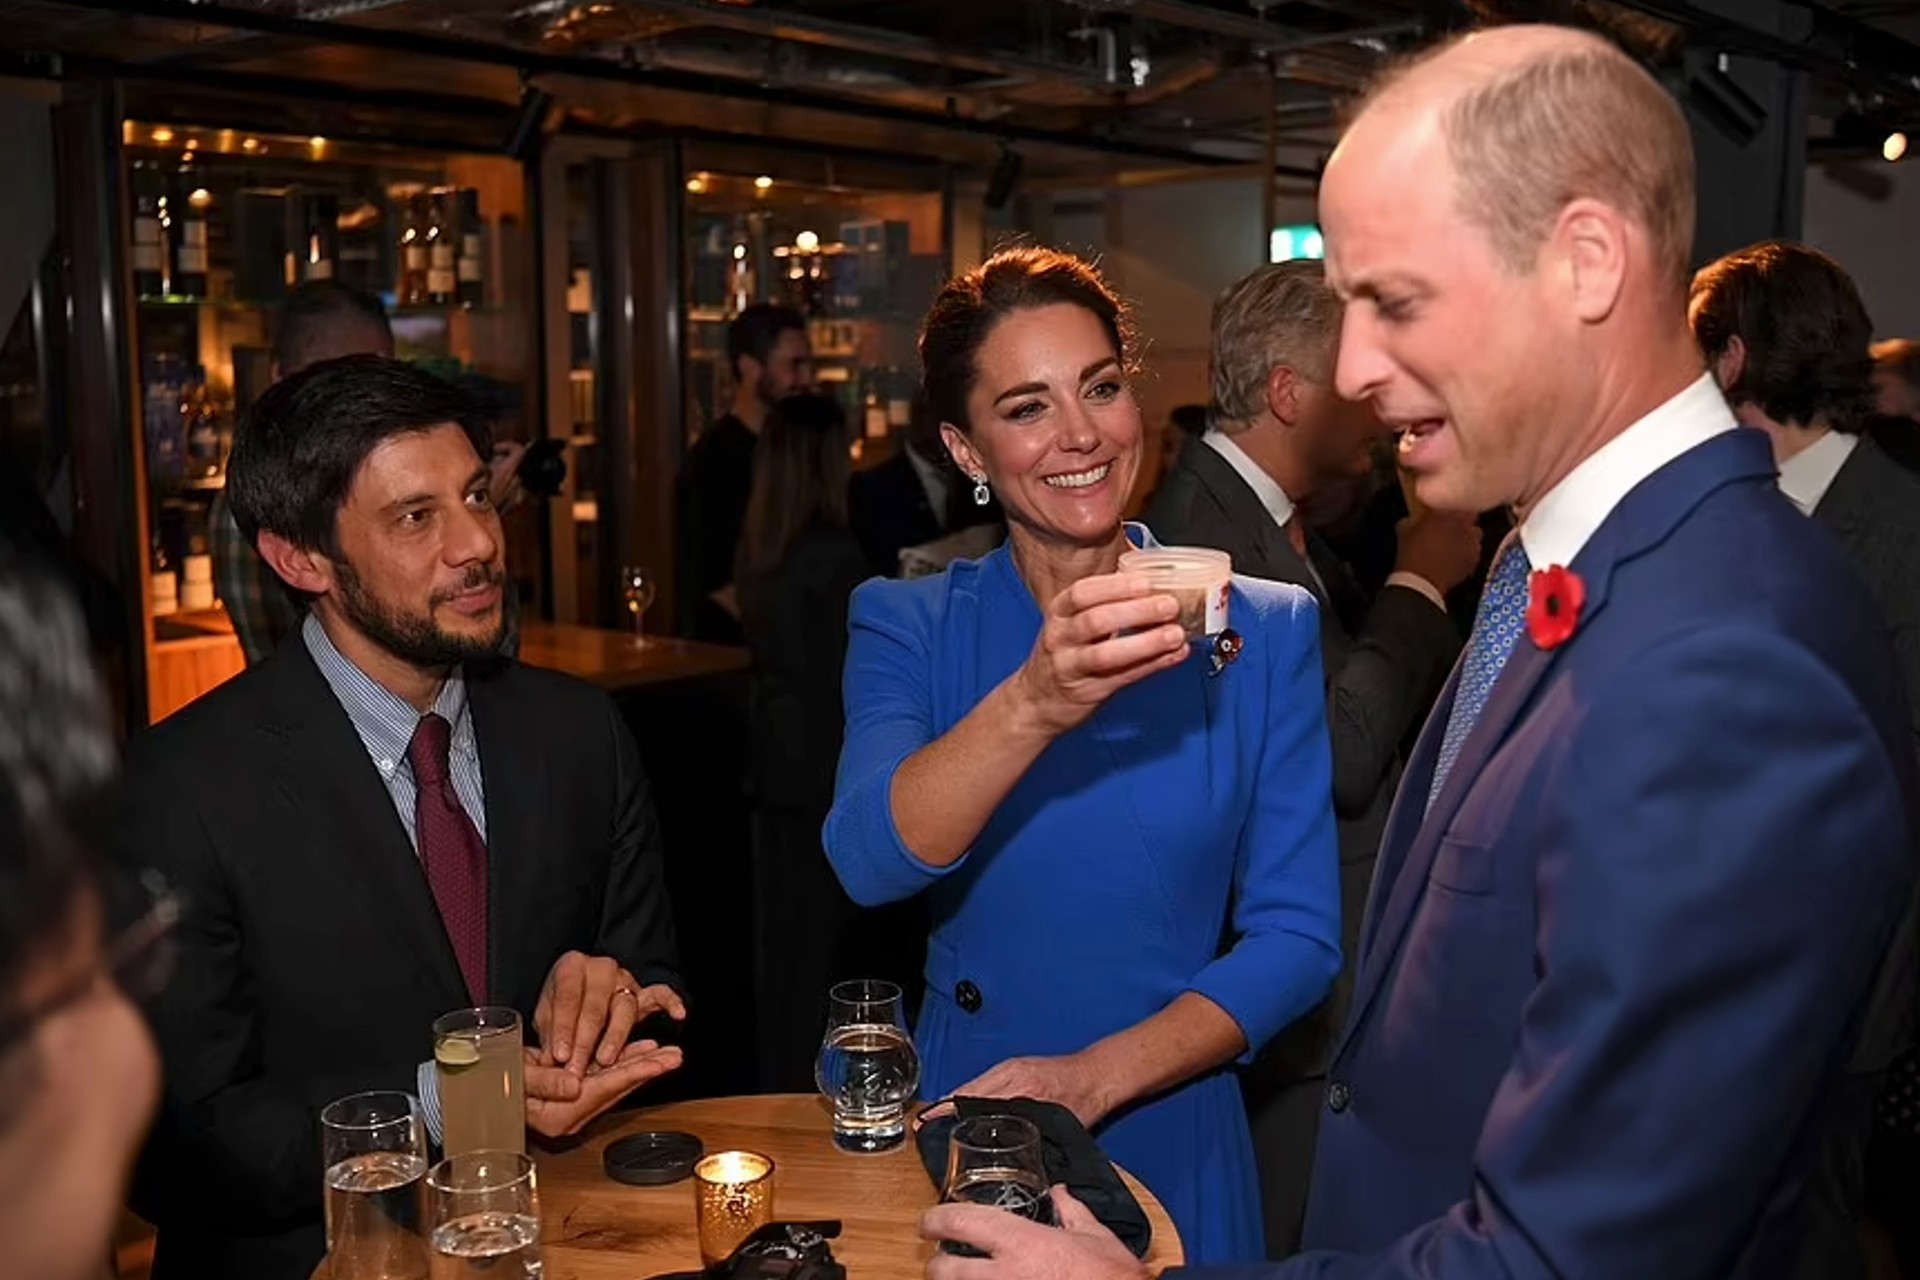 The Earthshot prize finalists with Prince William